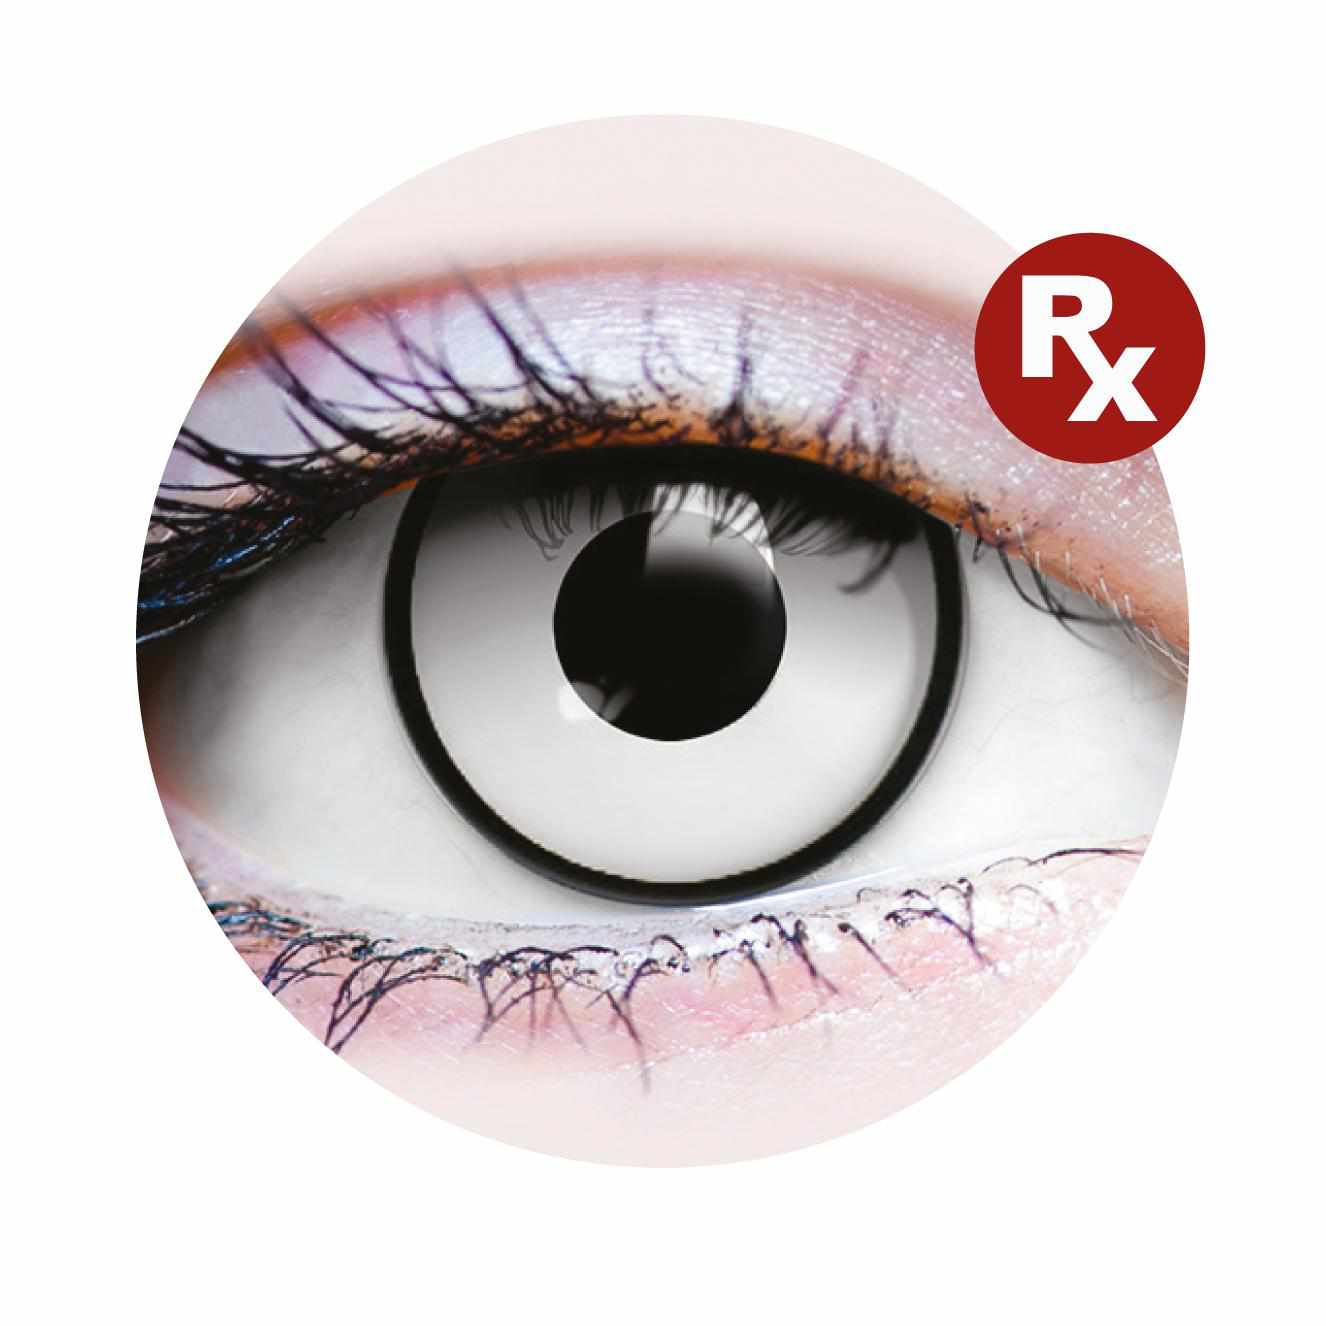 ContactsDirect - Using non prescription colored contact lenses this  Halloween could cause all kinds of eye problems. If this year's costume  calls for colored contacts, make sure they are properly prescribed!  #ContactFacts